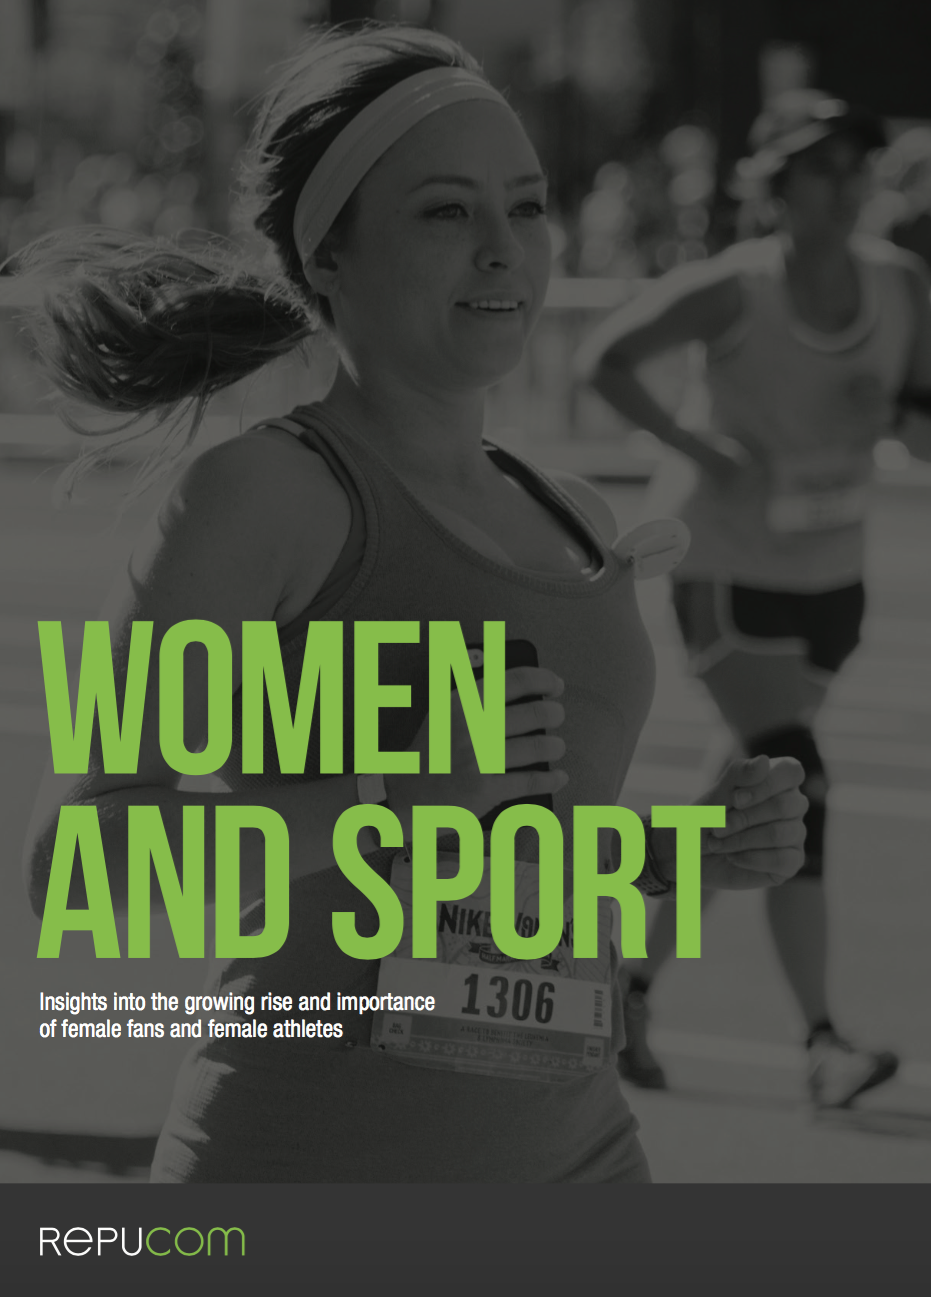 Insights into the growing rise and importance of female fans and female athletes